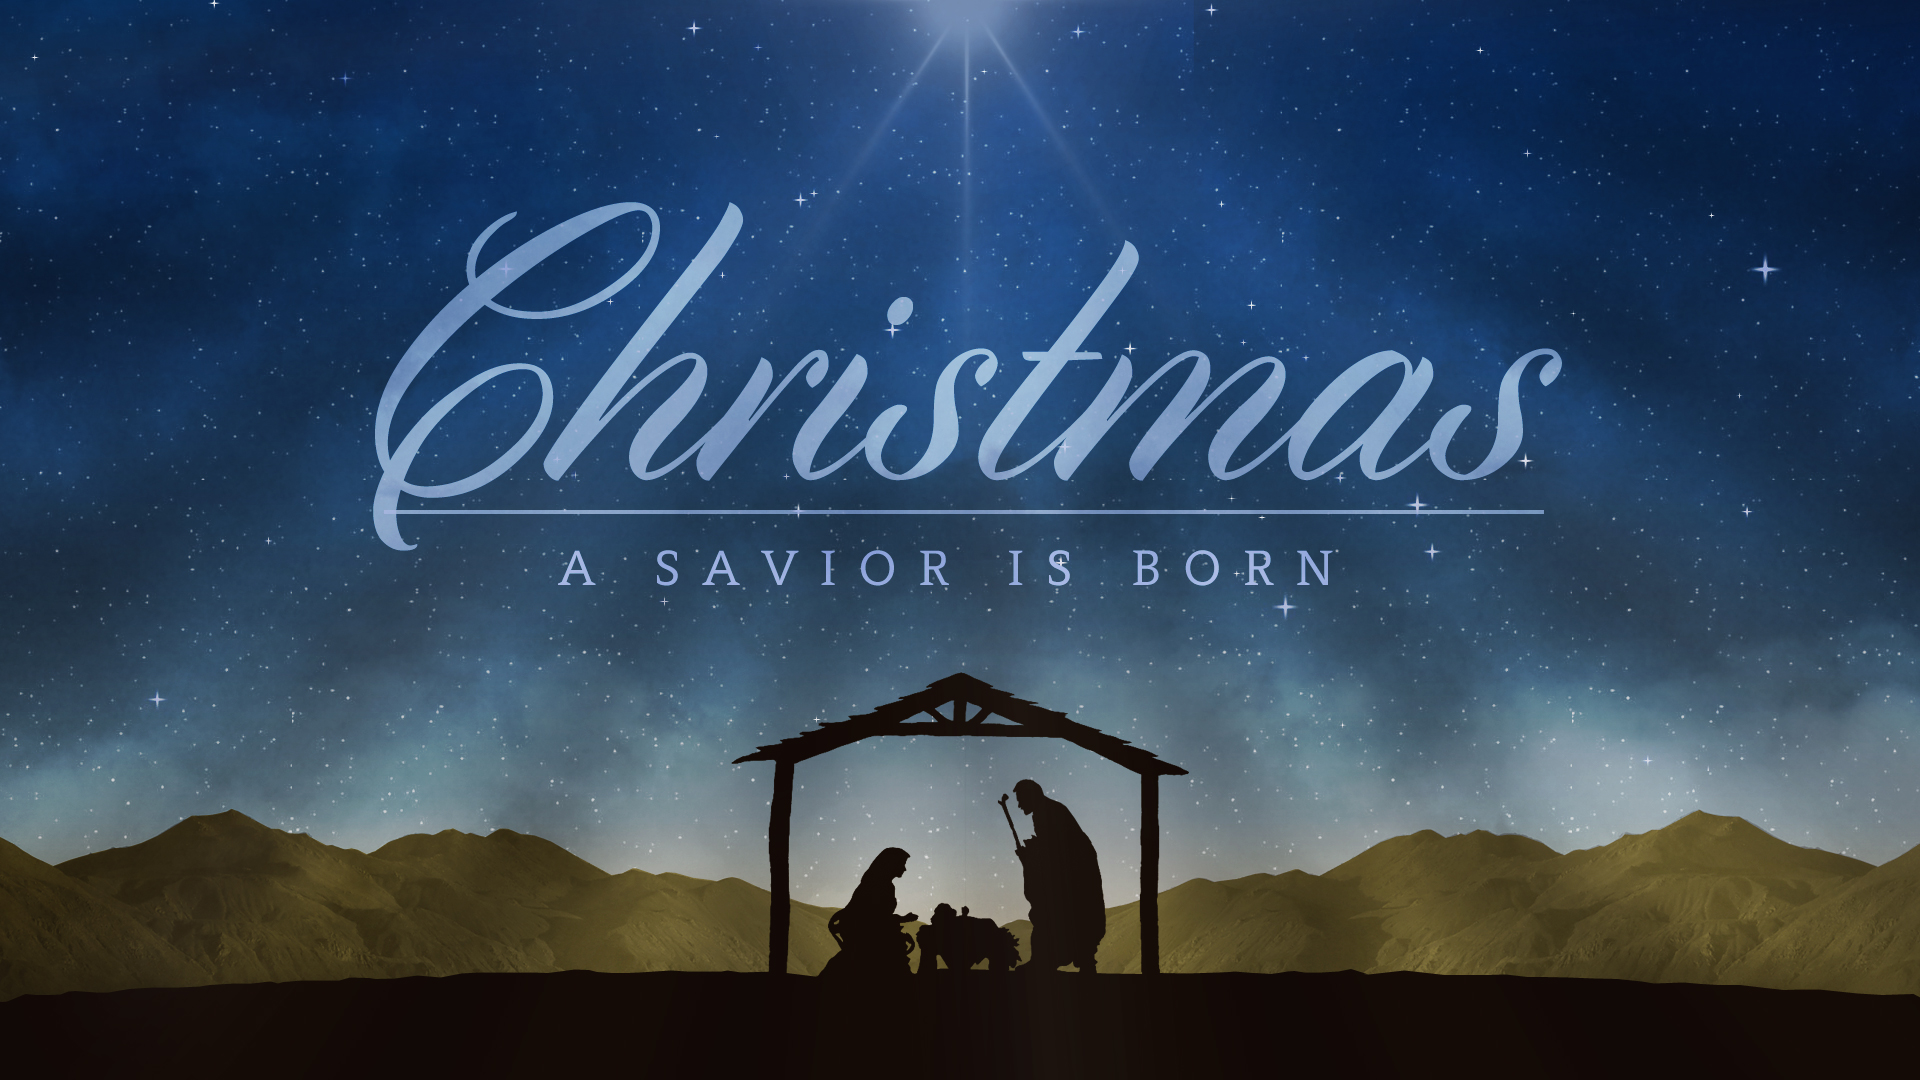 Christmas Day Service - 8 AM